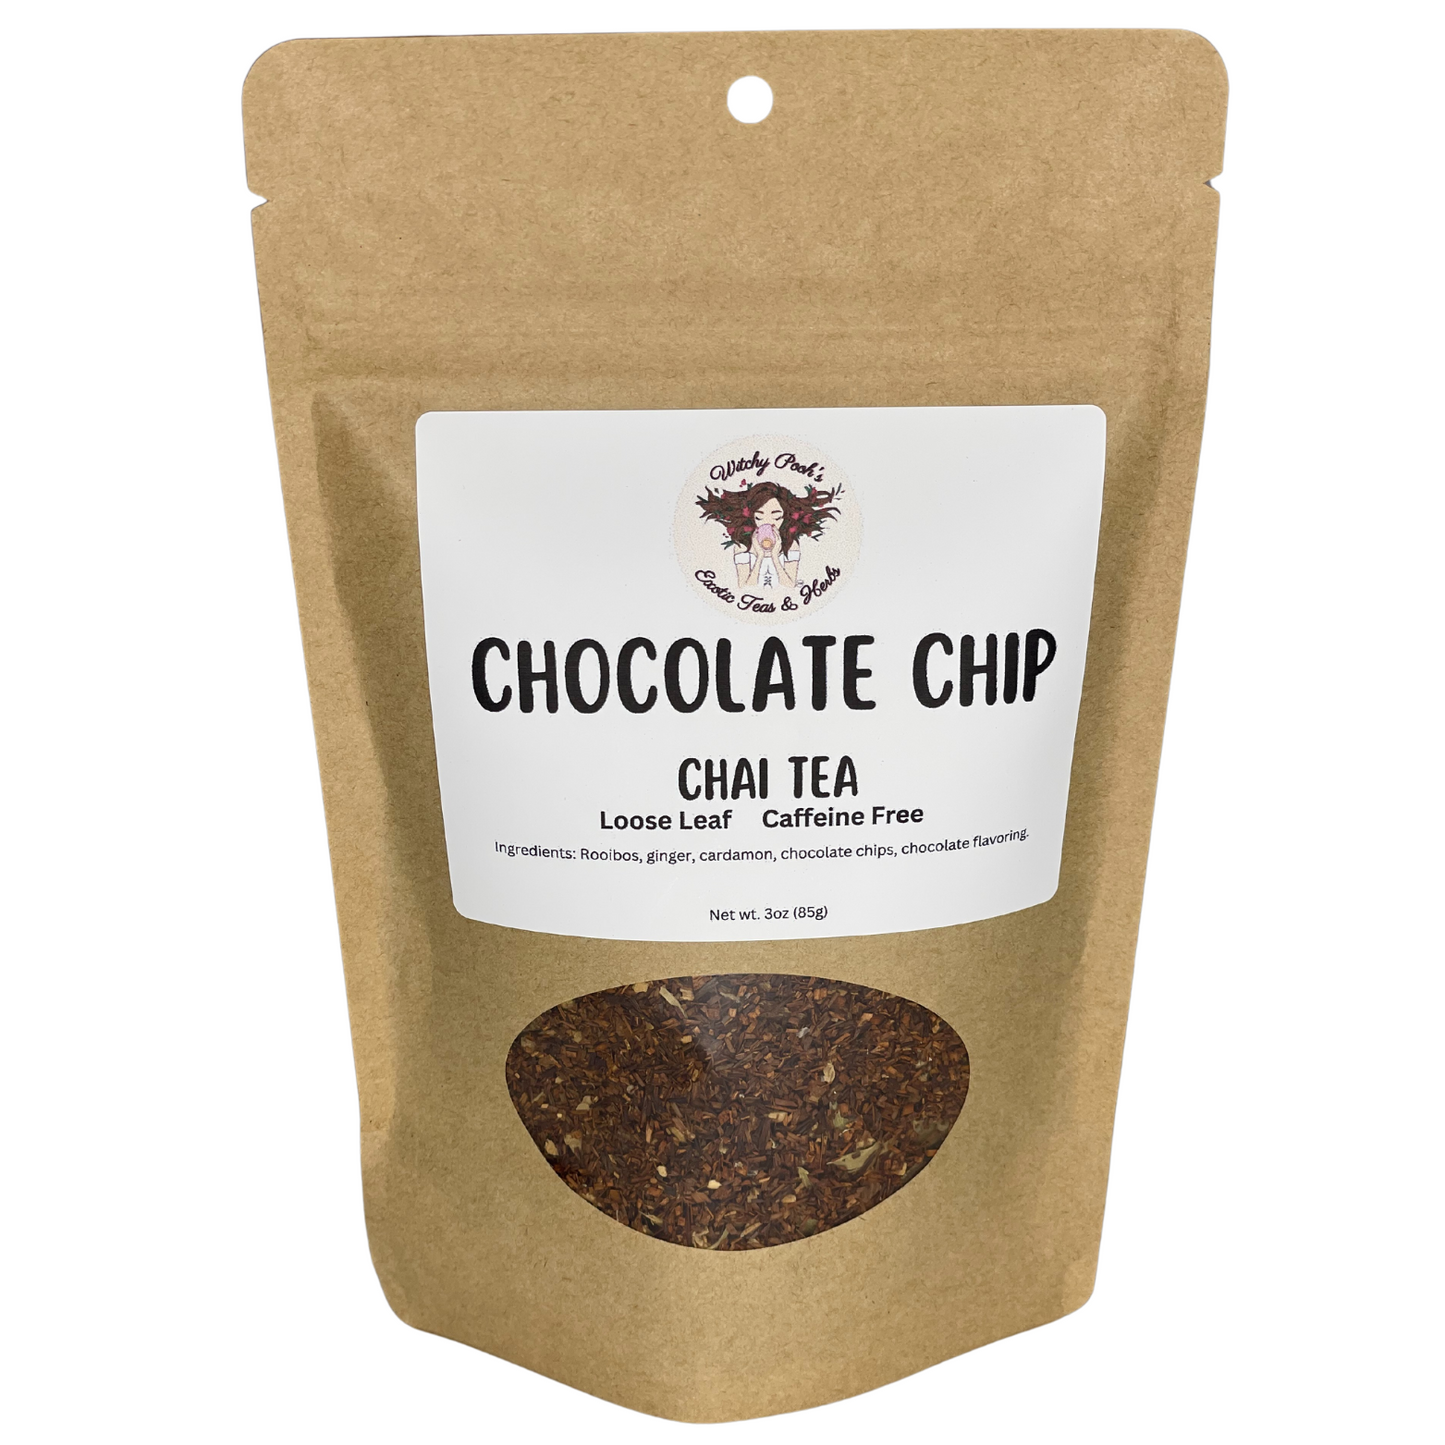 Witchy Pooh's Chocolate Chip Chai Loose Leaf Rooibos Herbal Tea with Real Chocolate Chips!-6